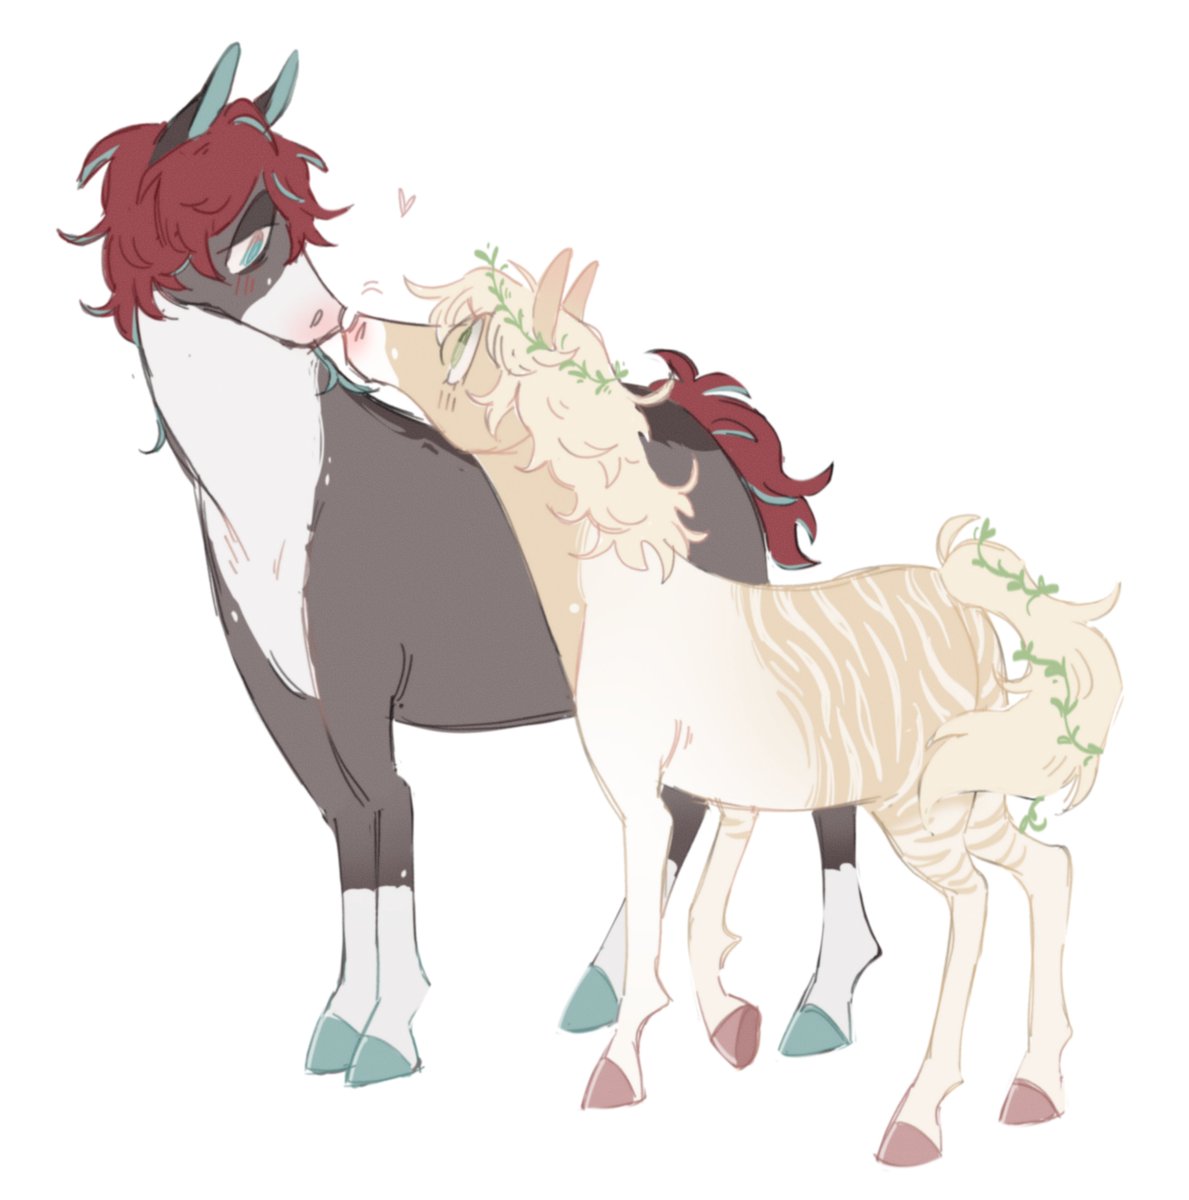 Me and Doppo as horse boyfriend and horse girlfriend.